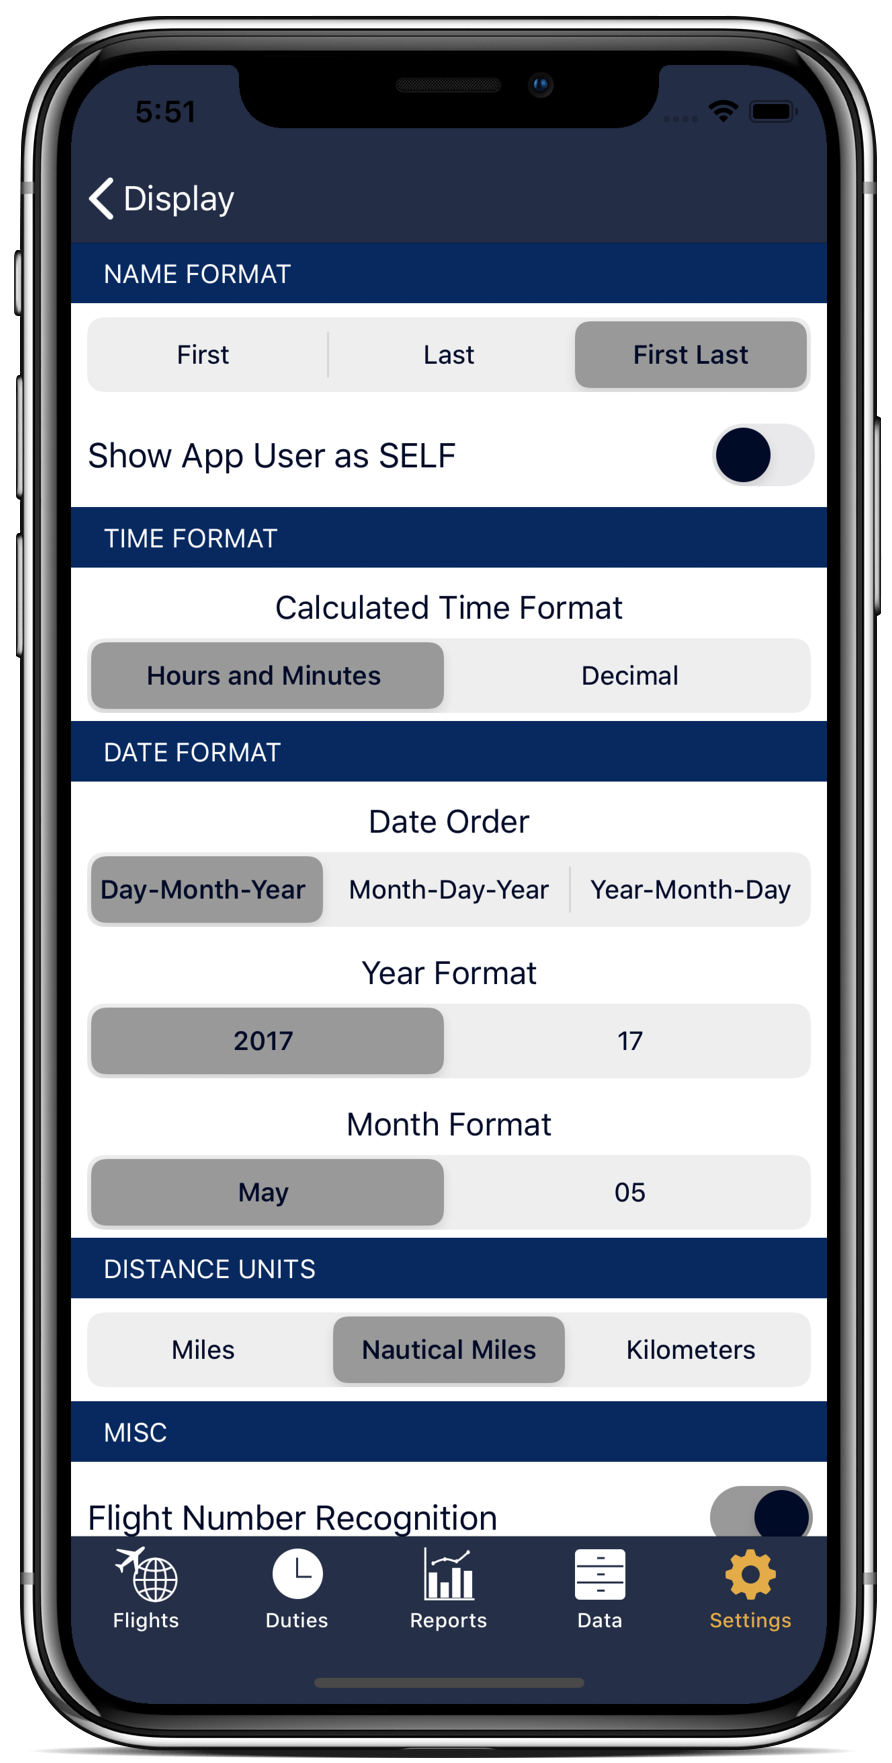 Your logbook app comes loaded with comprehensive settings.